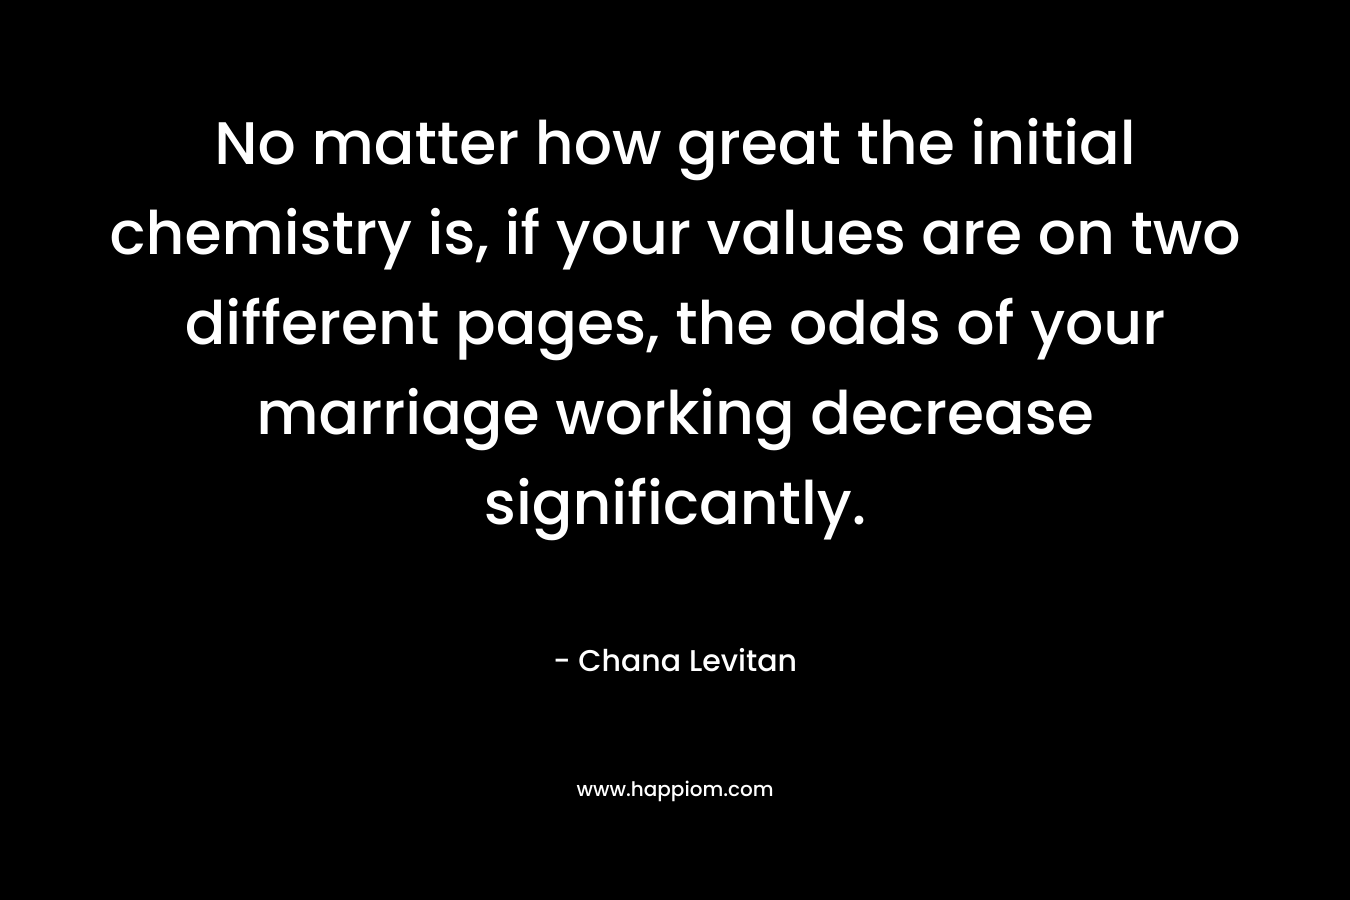 No matter how great the initial chemistry is, if your values are on two different pages, the odds of your marriage working decrease significantly. – Chana Levitan